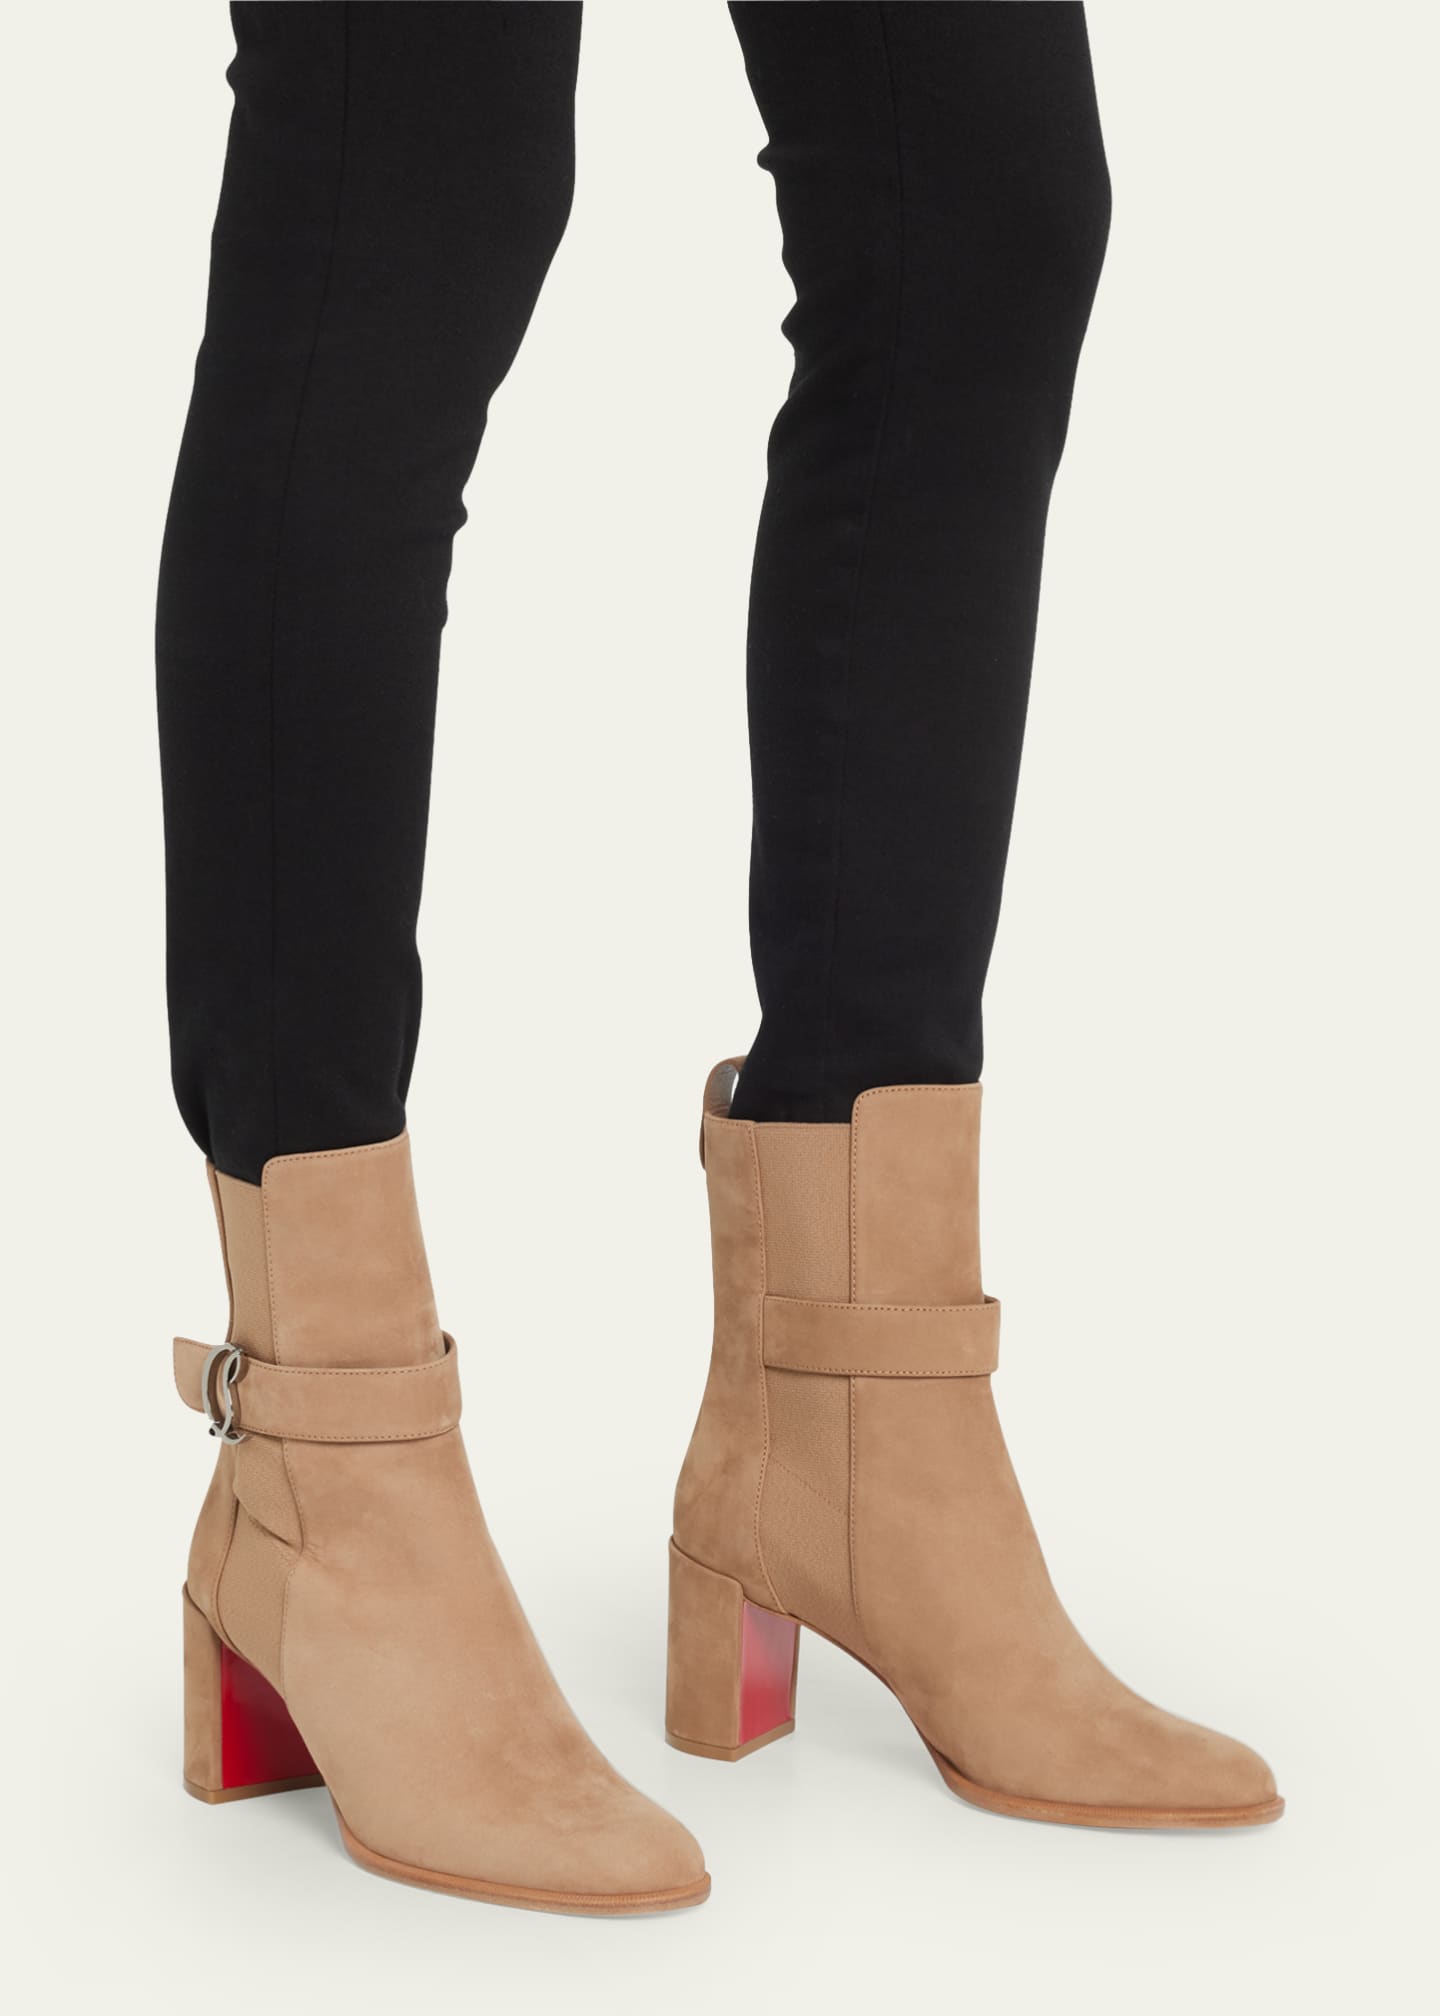 Christian Louboutin Belle Leather Red-Sole Ankle Boots - Bergdorf Goodman